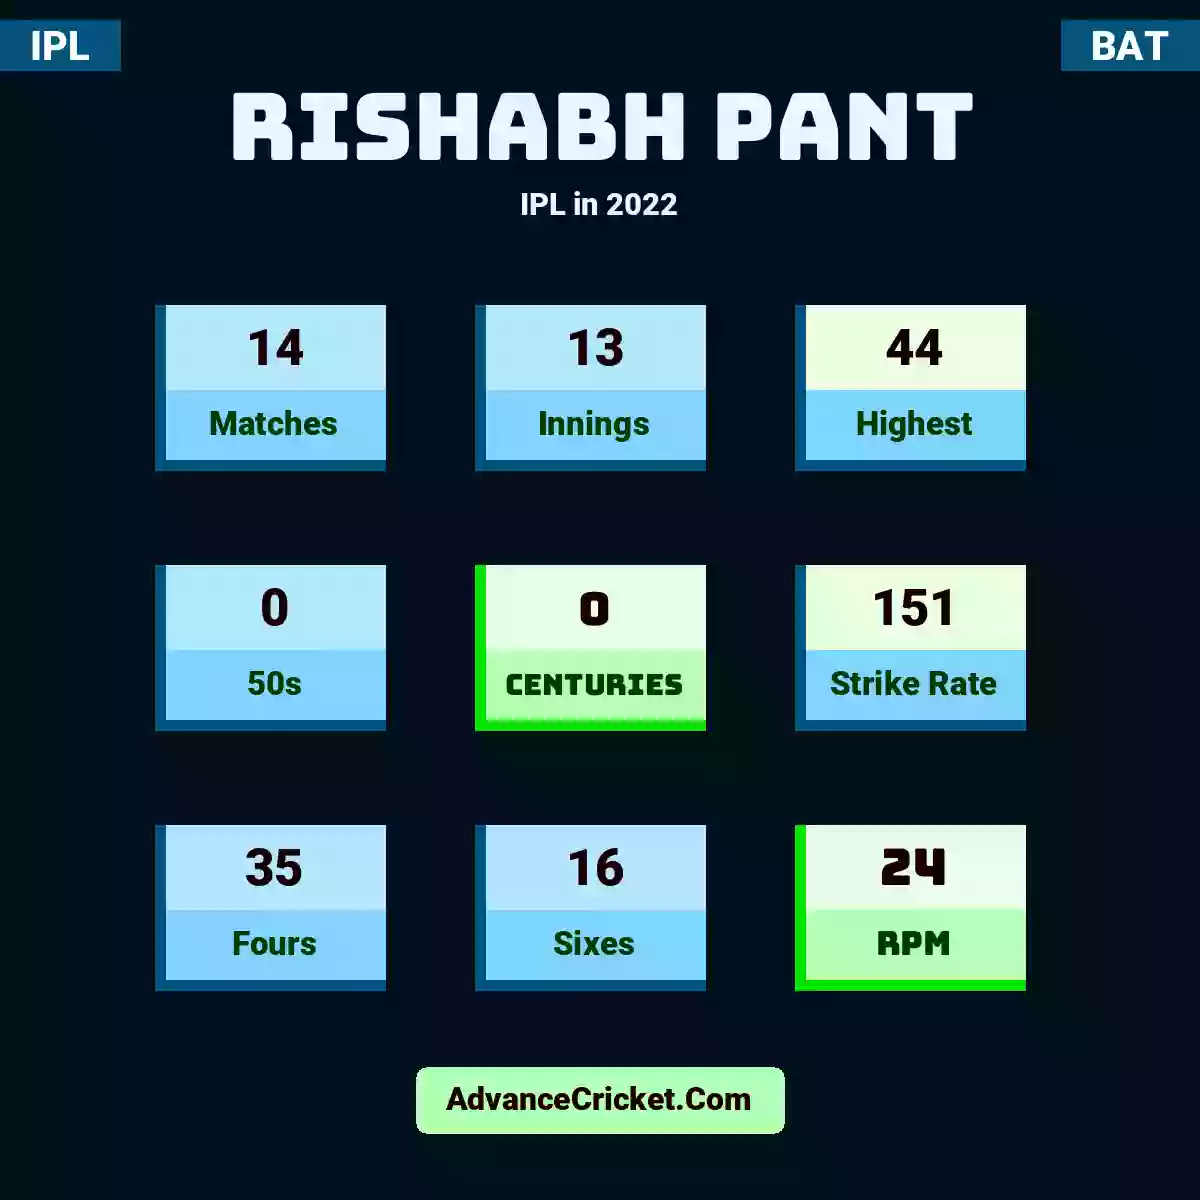 Rishabh Pant IPL  in 2022, Rishabh Pant played 14 matches, scored 44 runs as highest, 0 half-centuries, and 0 centuries, with a strike rate of 151. R.Pant hit 35 fours and 16 sixes, with an RPM of 24.